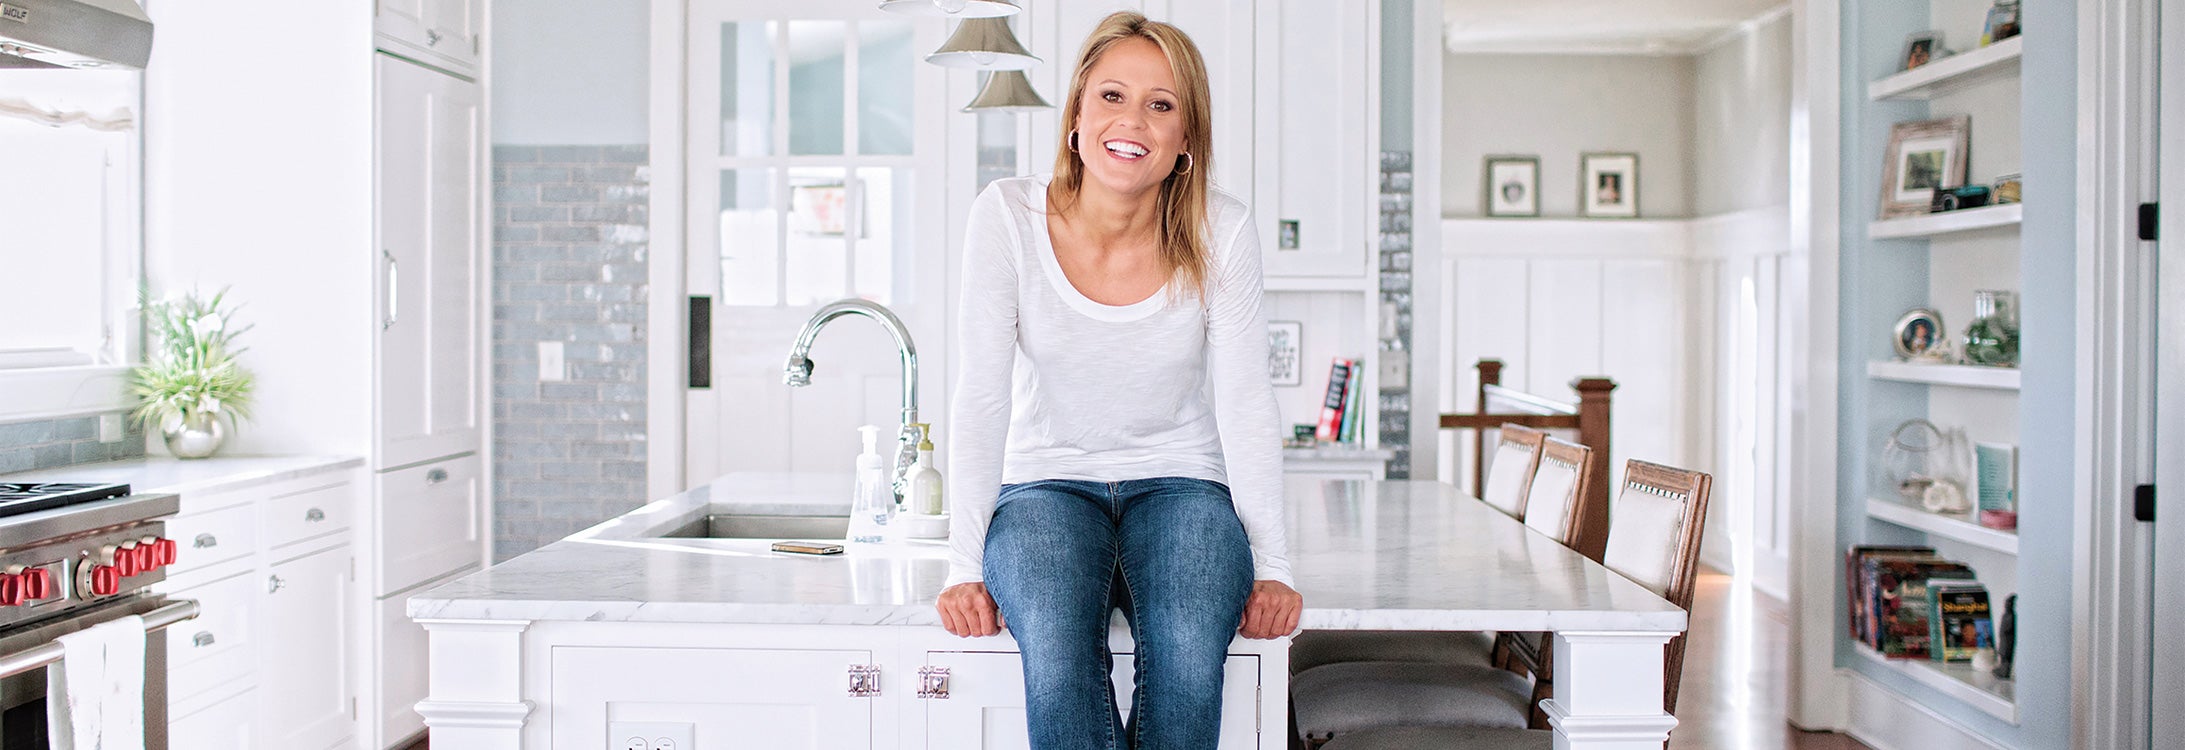 Born into a builder family, Marnie Oursler ’01 traded her softball cleats for a hard hat and now builds spectacular beach homes on the DIY Network.